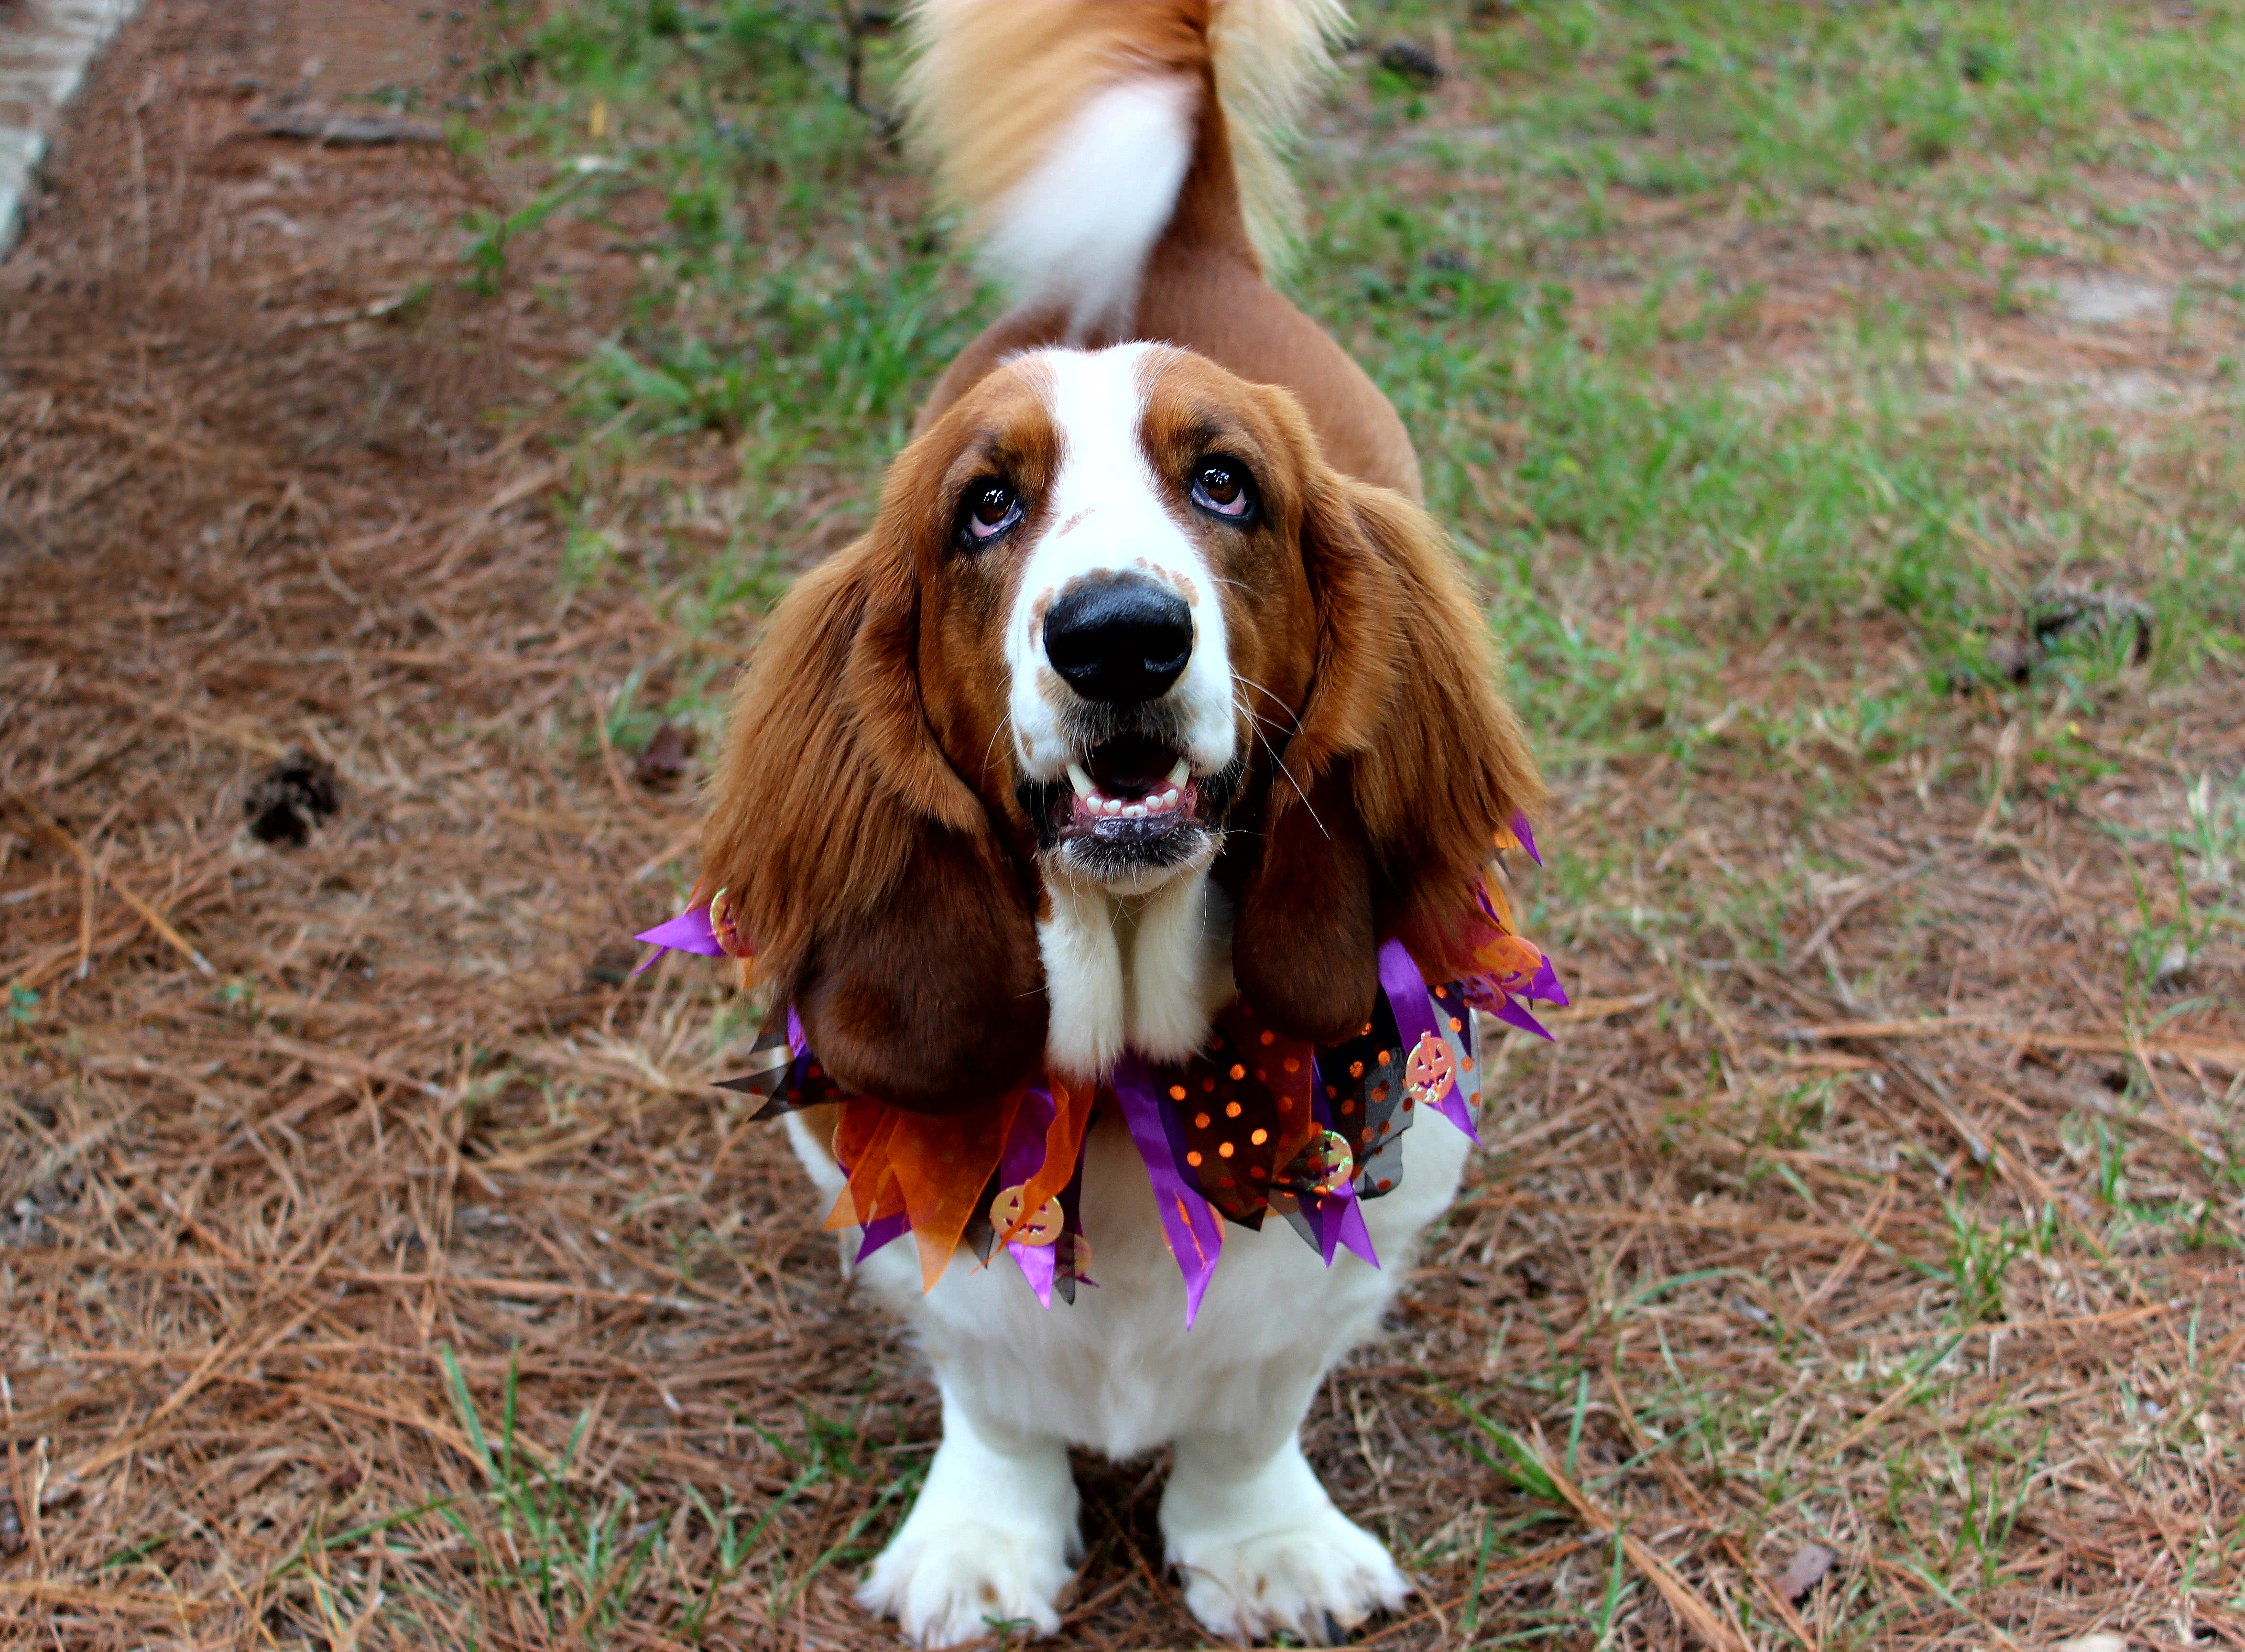 long haired basset hound